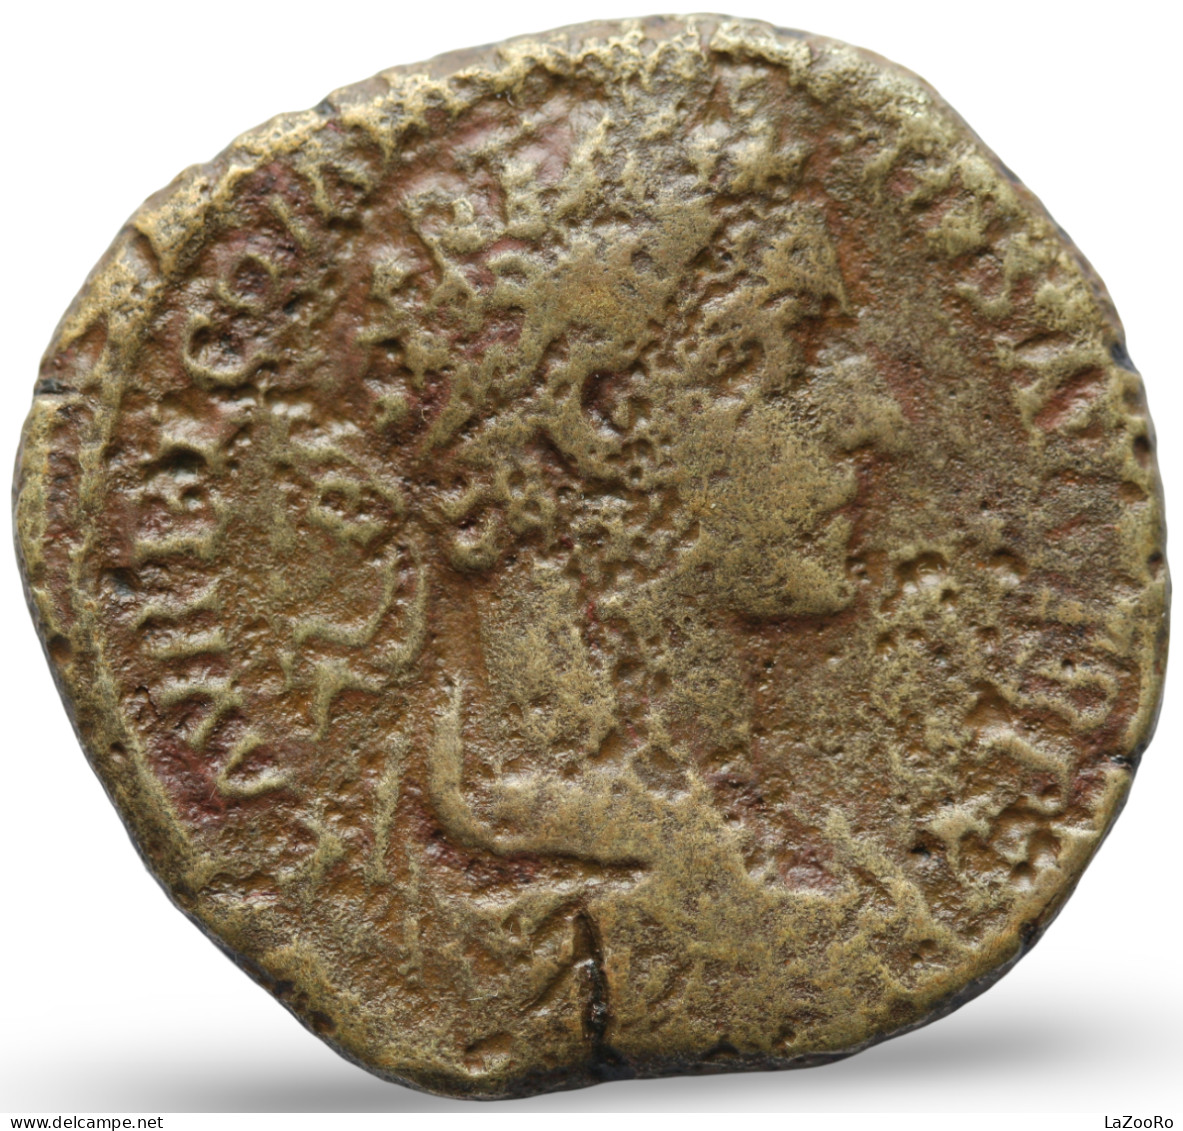 LaZooRo: Roman Empire - AE Sestertius Of Commodus (177-192 AD), Victory, Jupiter - The Anthonines (96 AD Tot 192 AD)